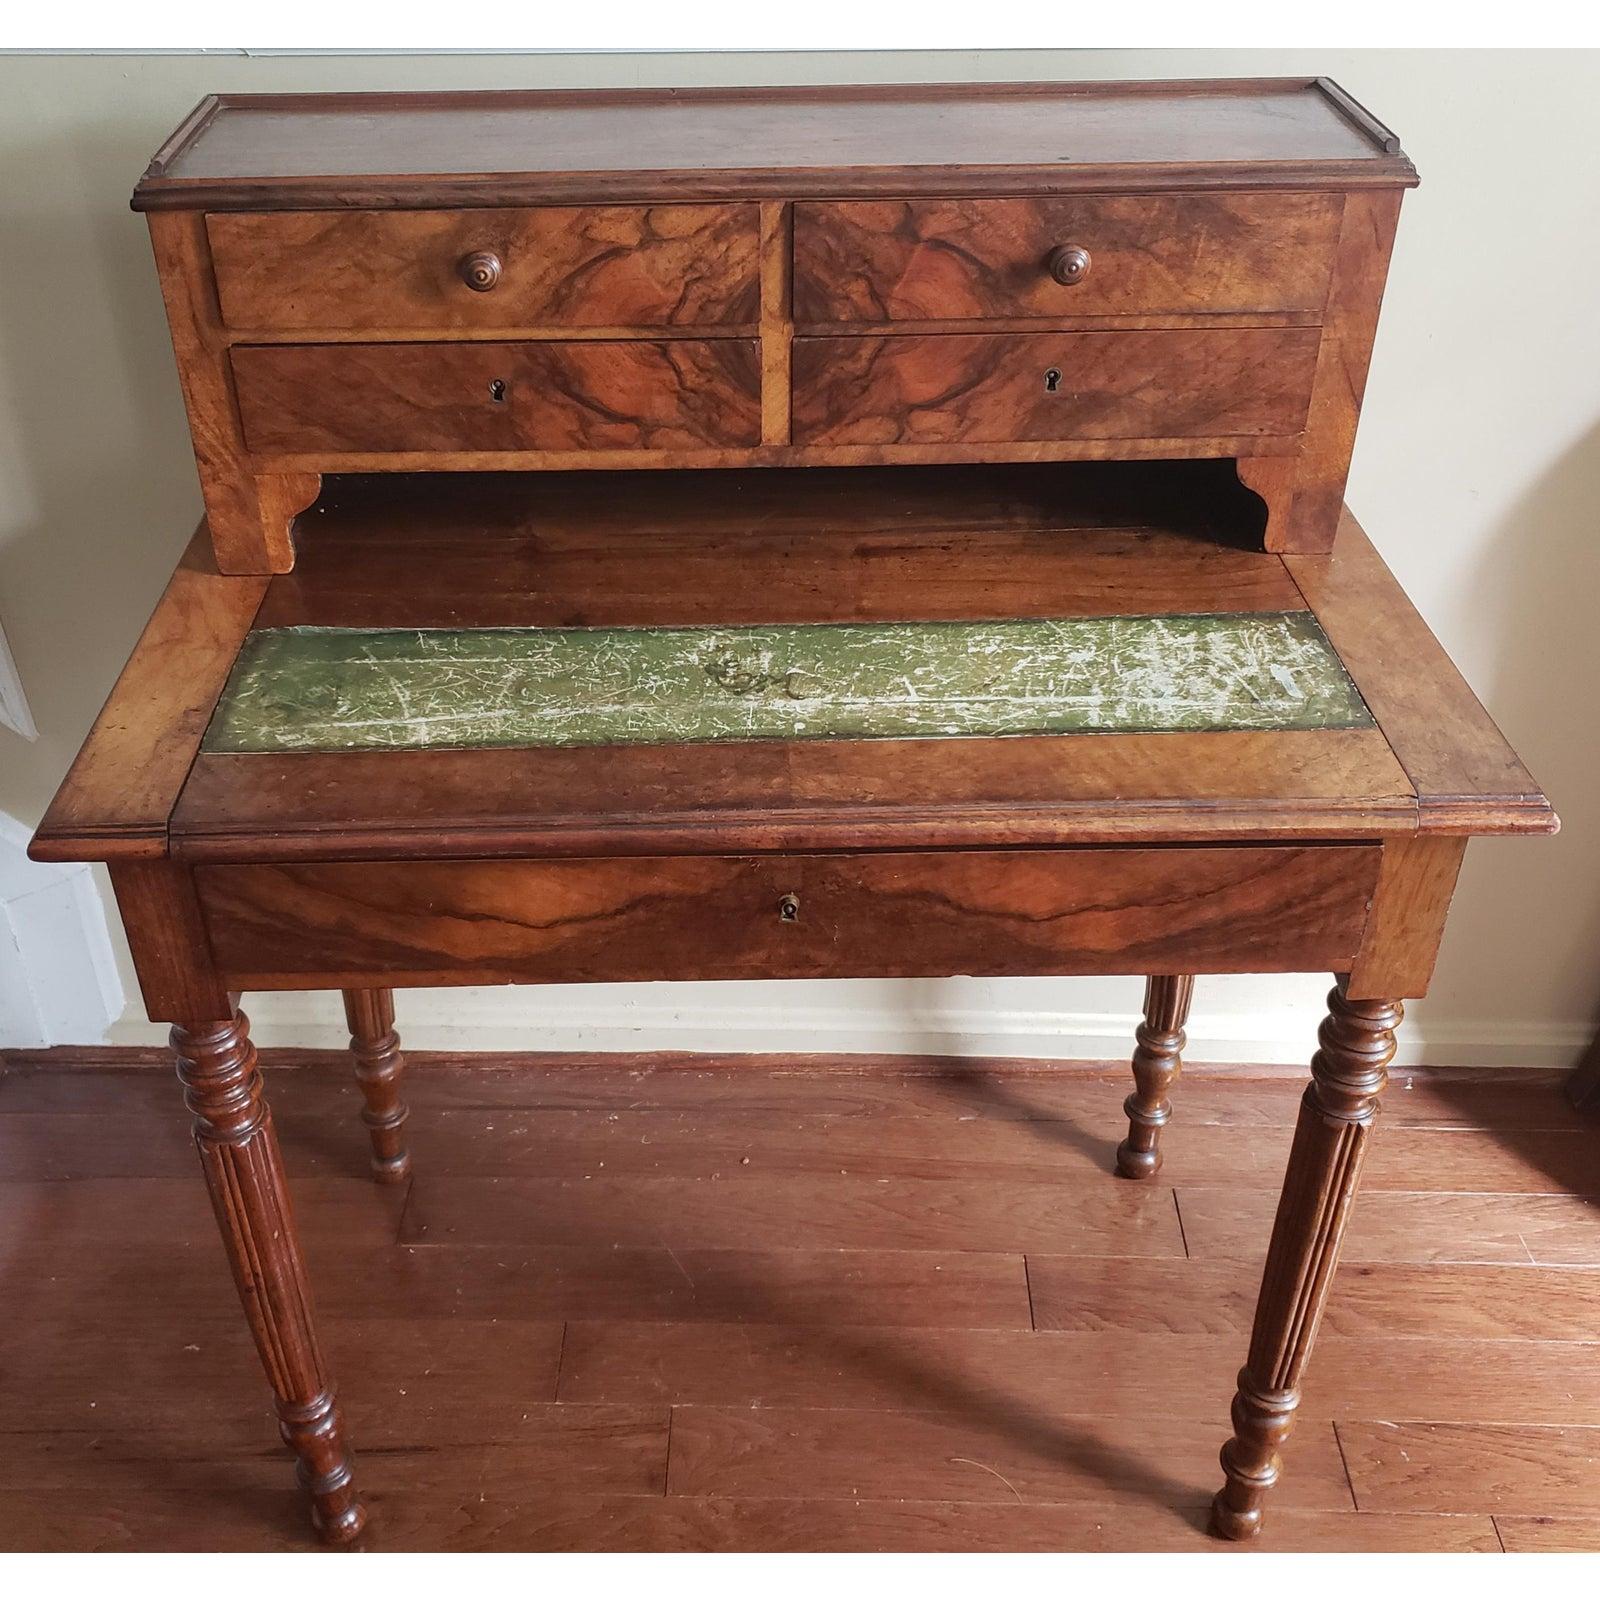 19th century Louis Philippe writing desk in walnut - antique writing desk - antique desk - antique table - french antiques. This elegant antique writing desk made from walnut wood, walnut burl veneer and leather top insert. Very practical because of